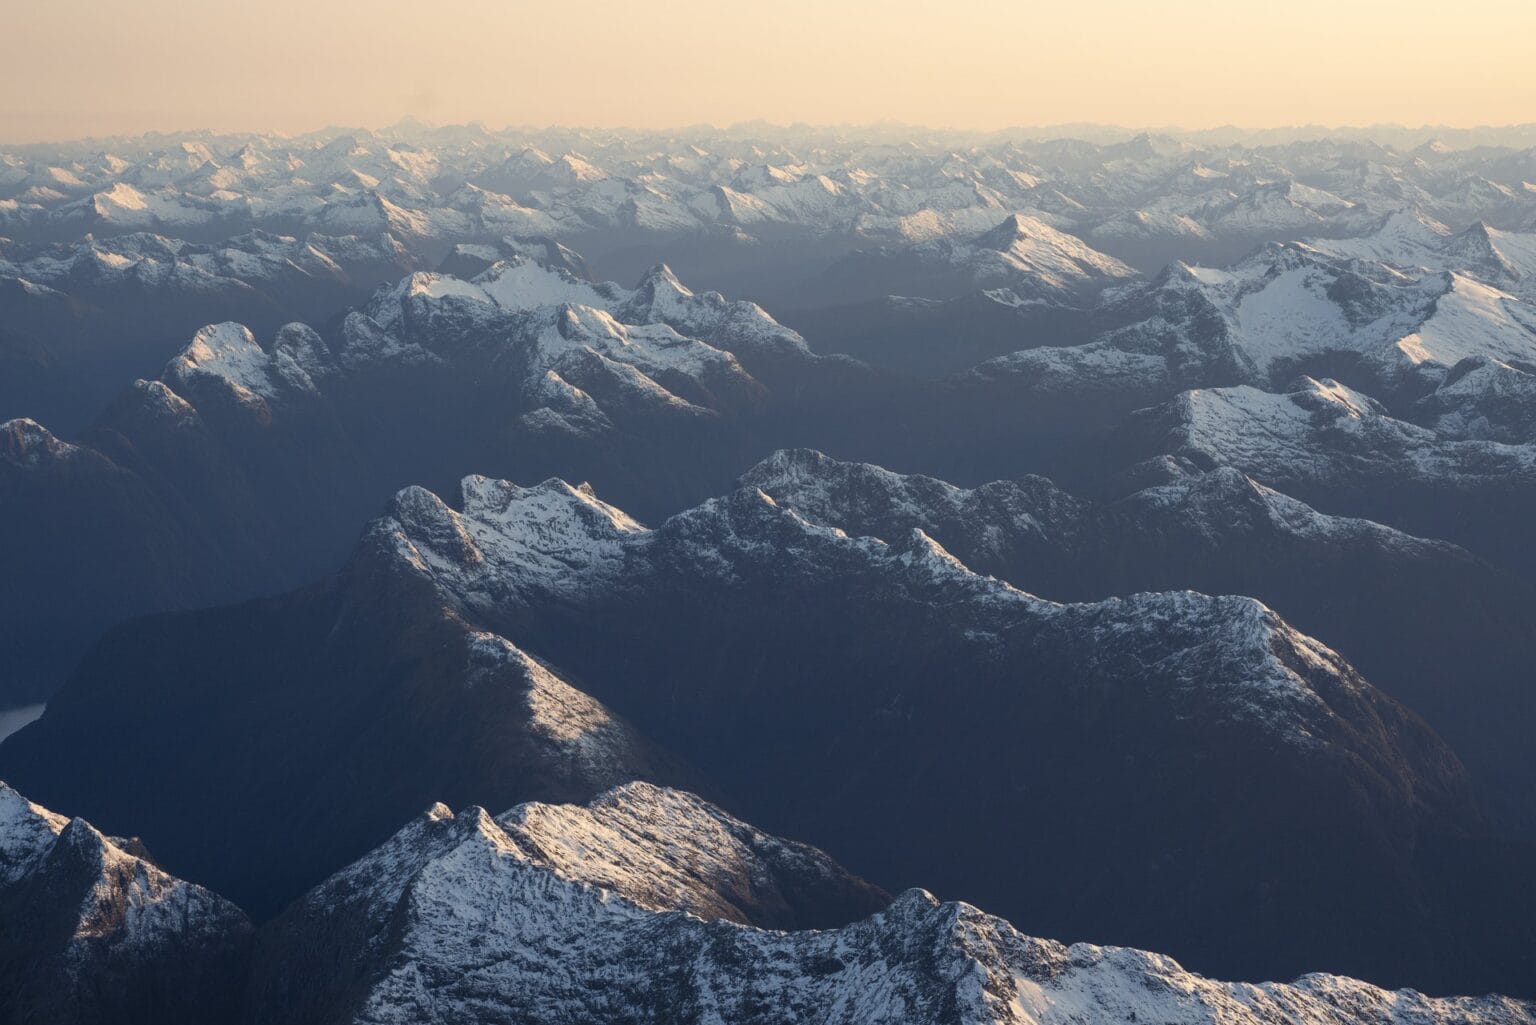 Aerial view of a mountain range at sunset, with peaks dusted in snow and valleys cast in shadows, bathed in soft golden light typical of a Fiordland experience.